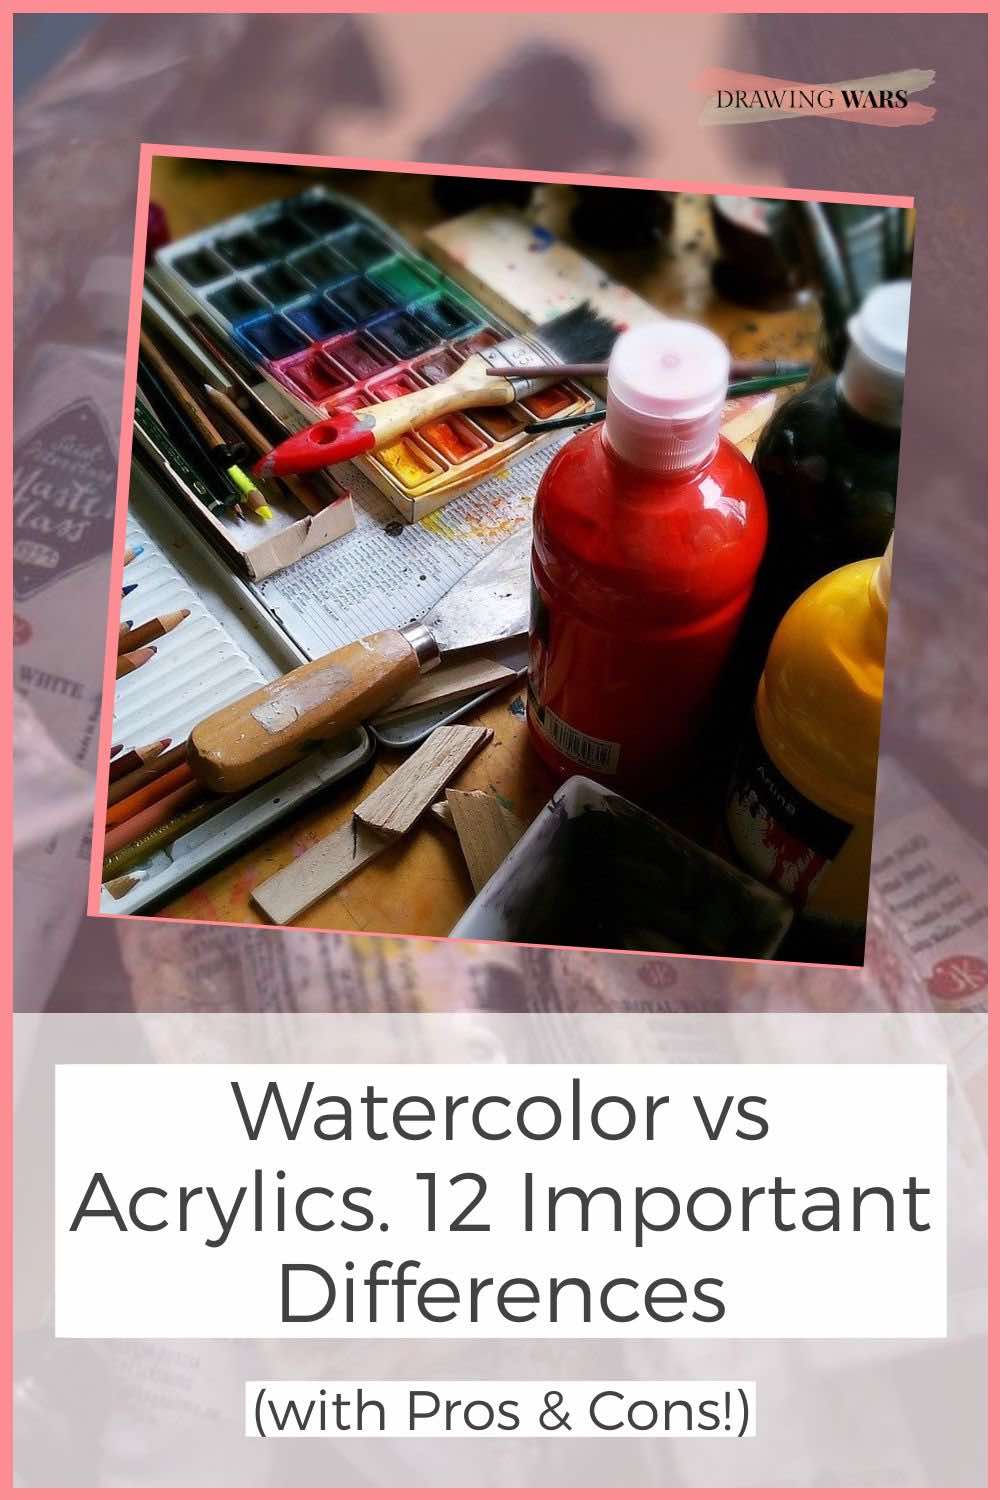 Watercolor vs Acrylics. 12 Important Differences (With Pros & Cons!) Thumbnail